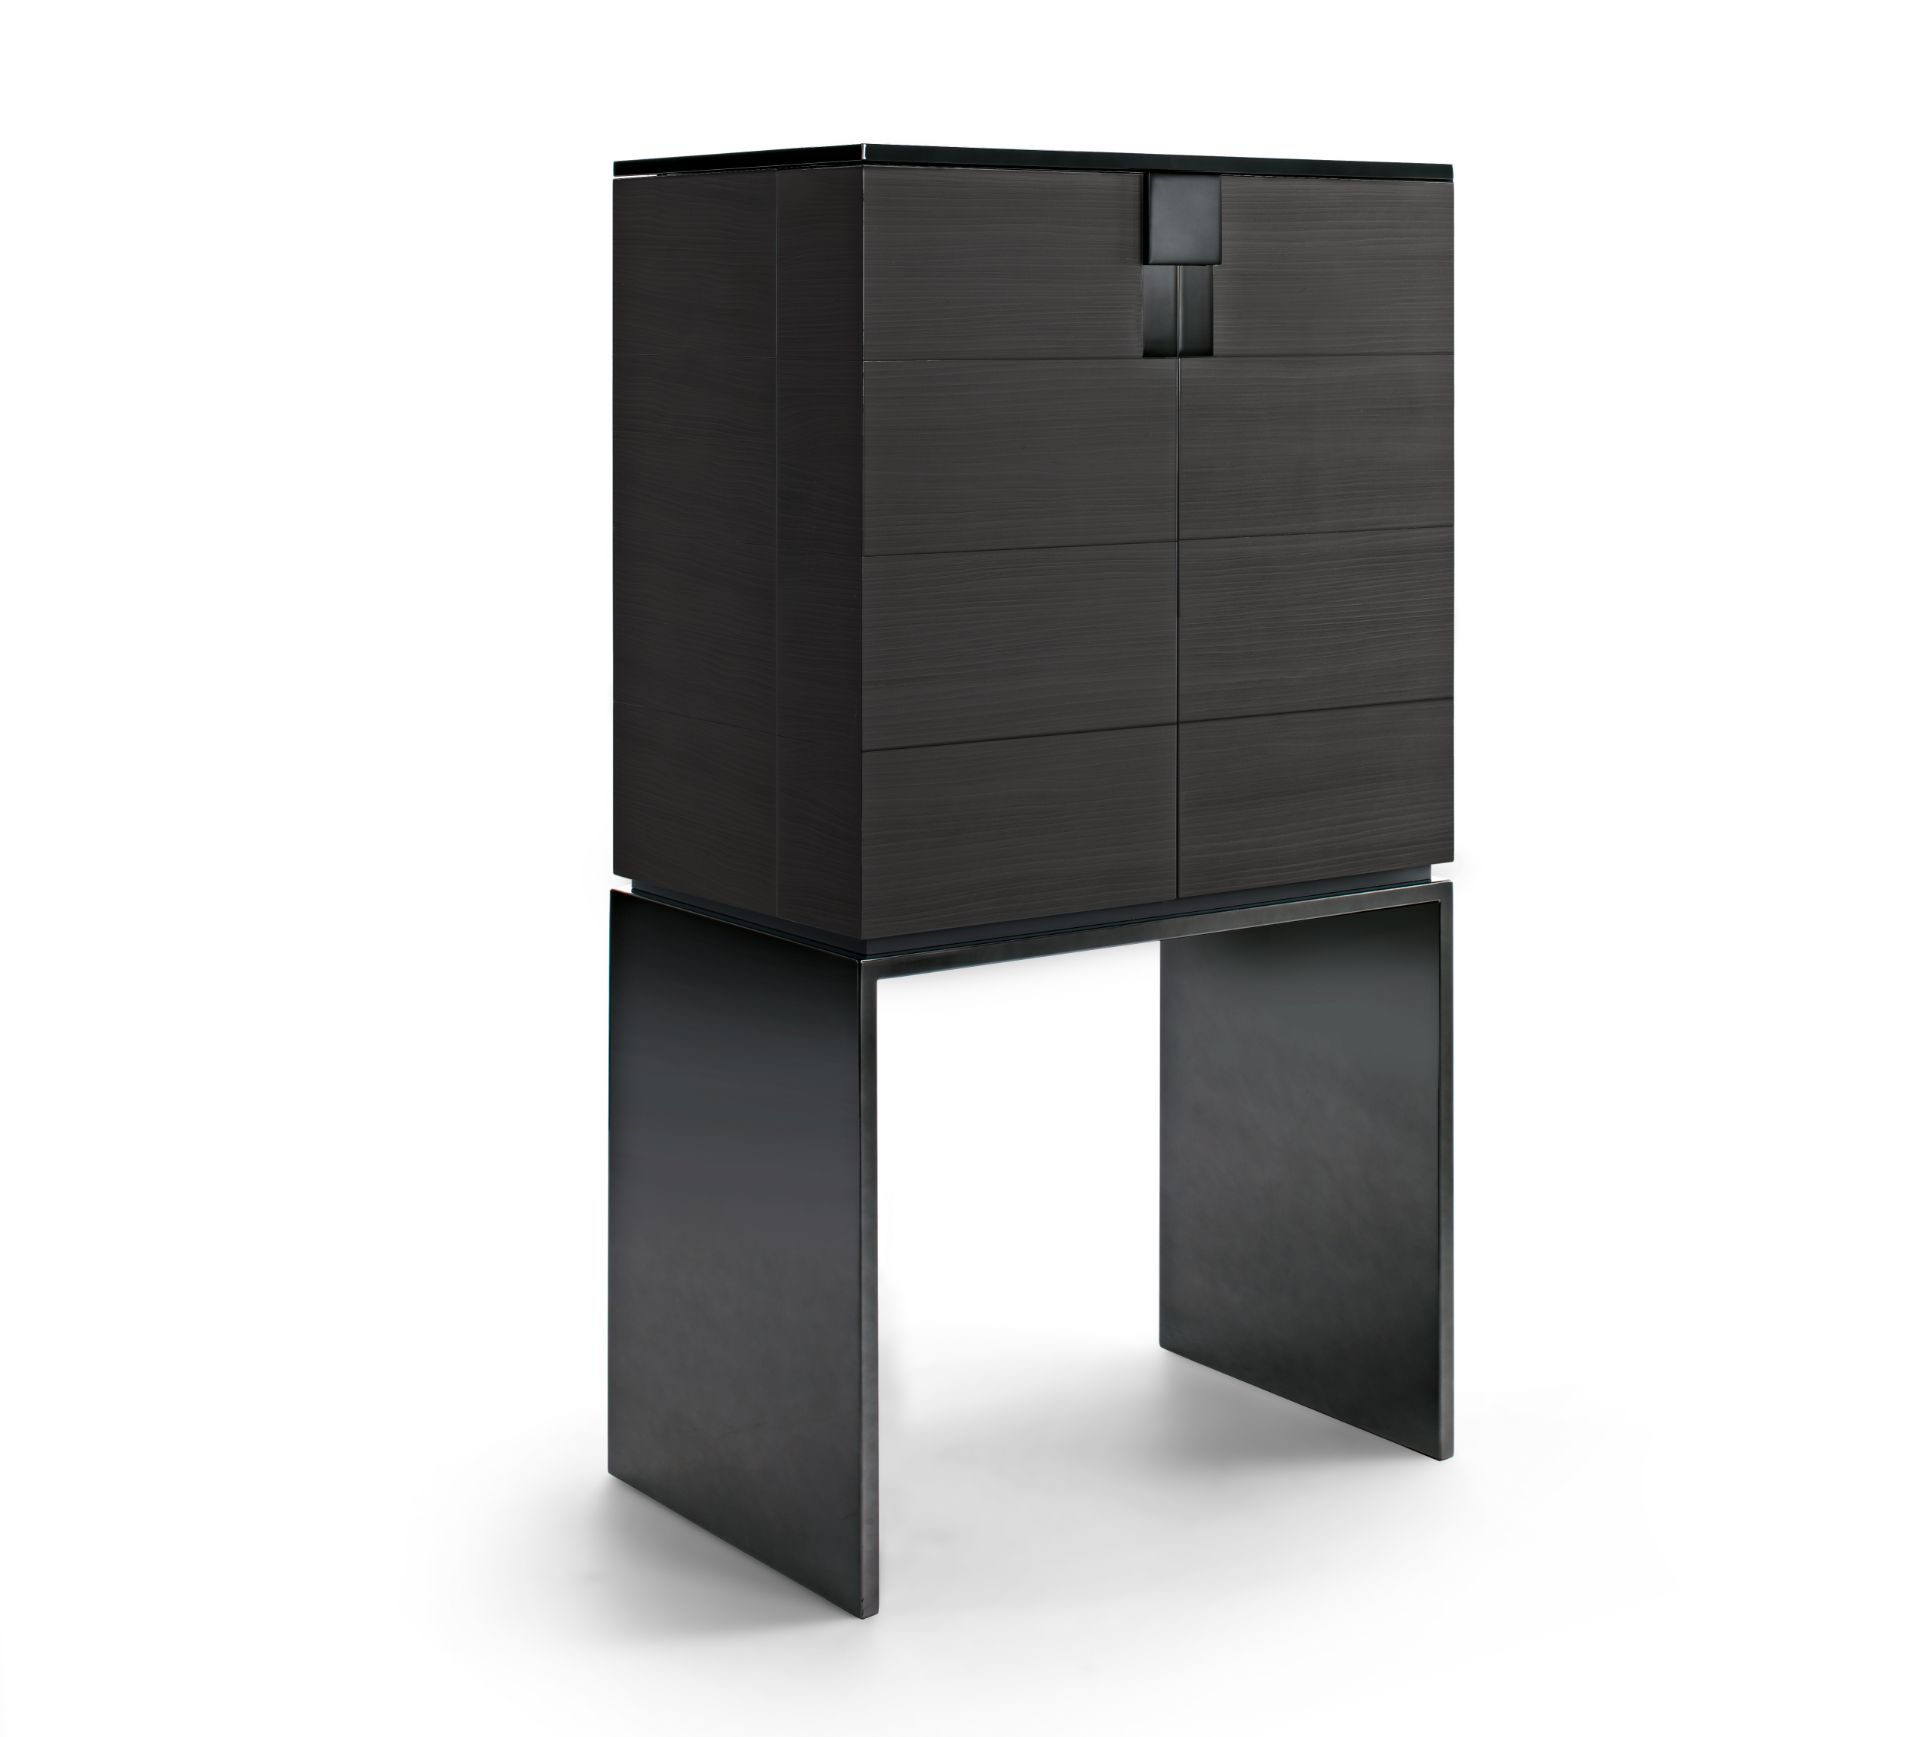 Black and More Bar Cabinet by Telemaco for Malerba Black chrome, combined with brushed matt finishes - Bild 5 aus 13